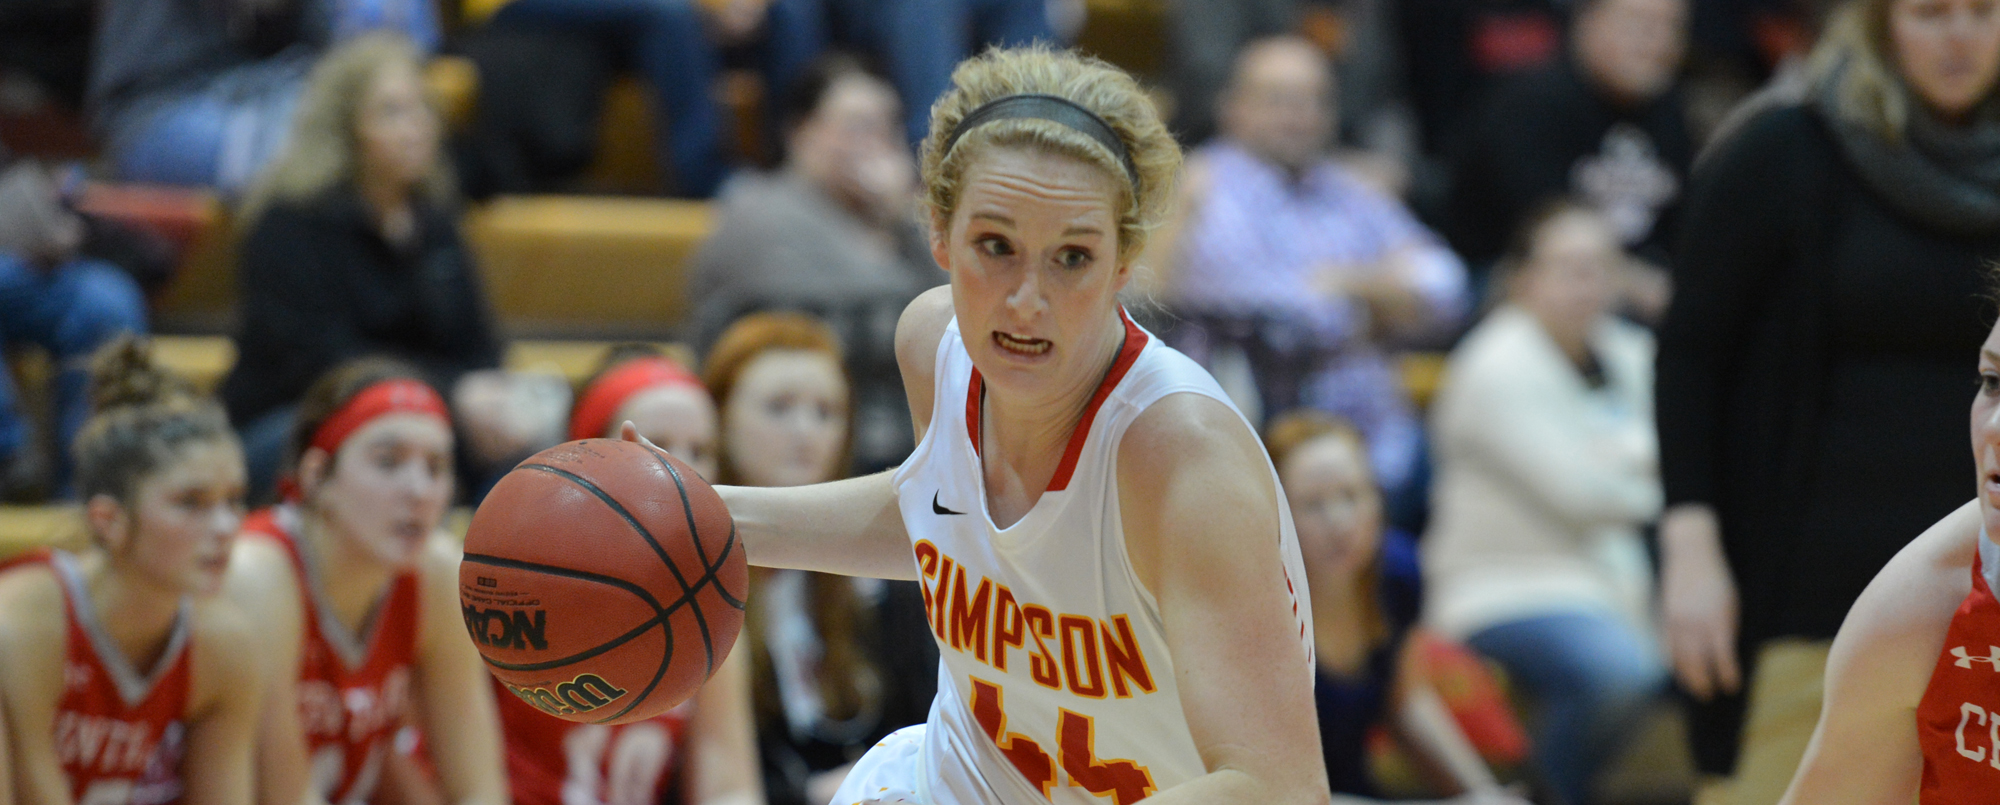 Maddie Simmons scored a career-high 14 points in Simpson's 64-61 win over Coe.